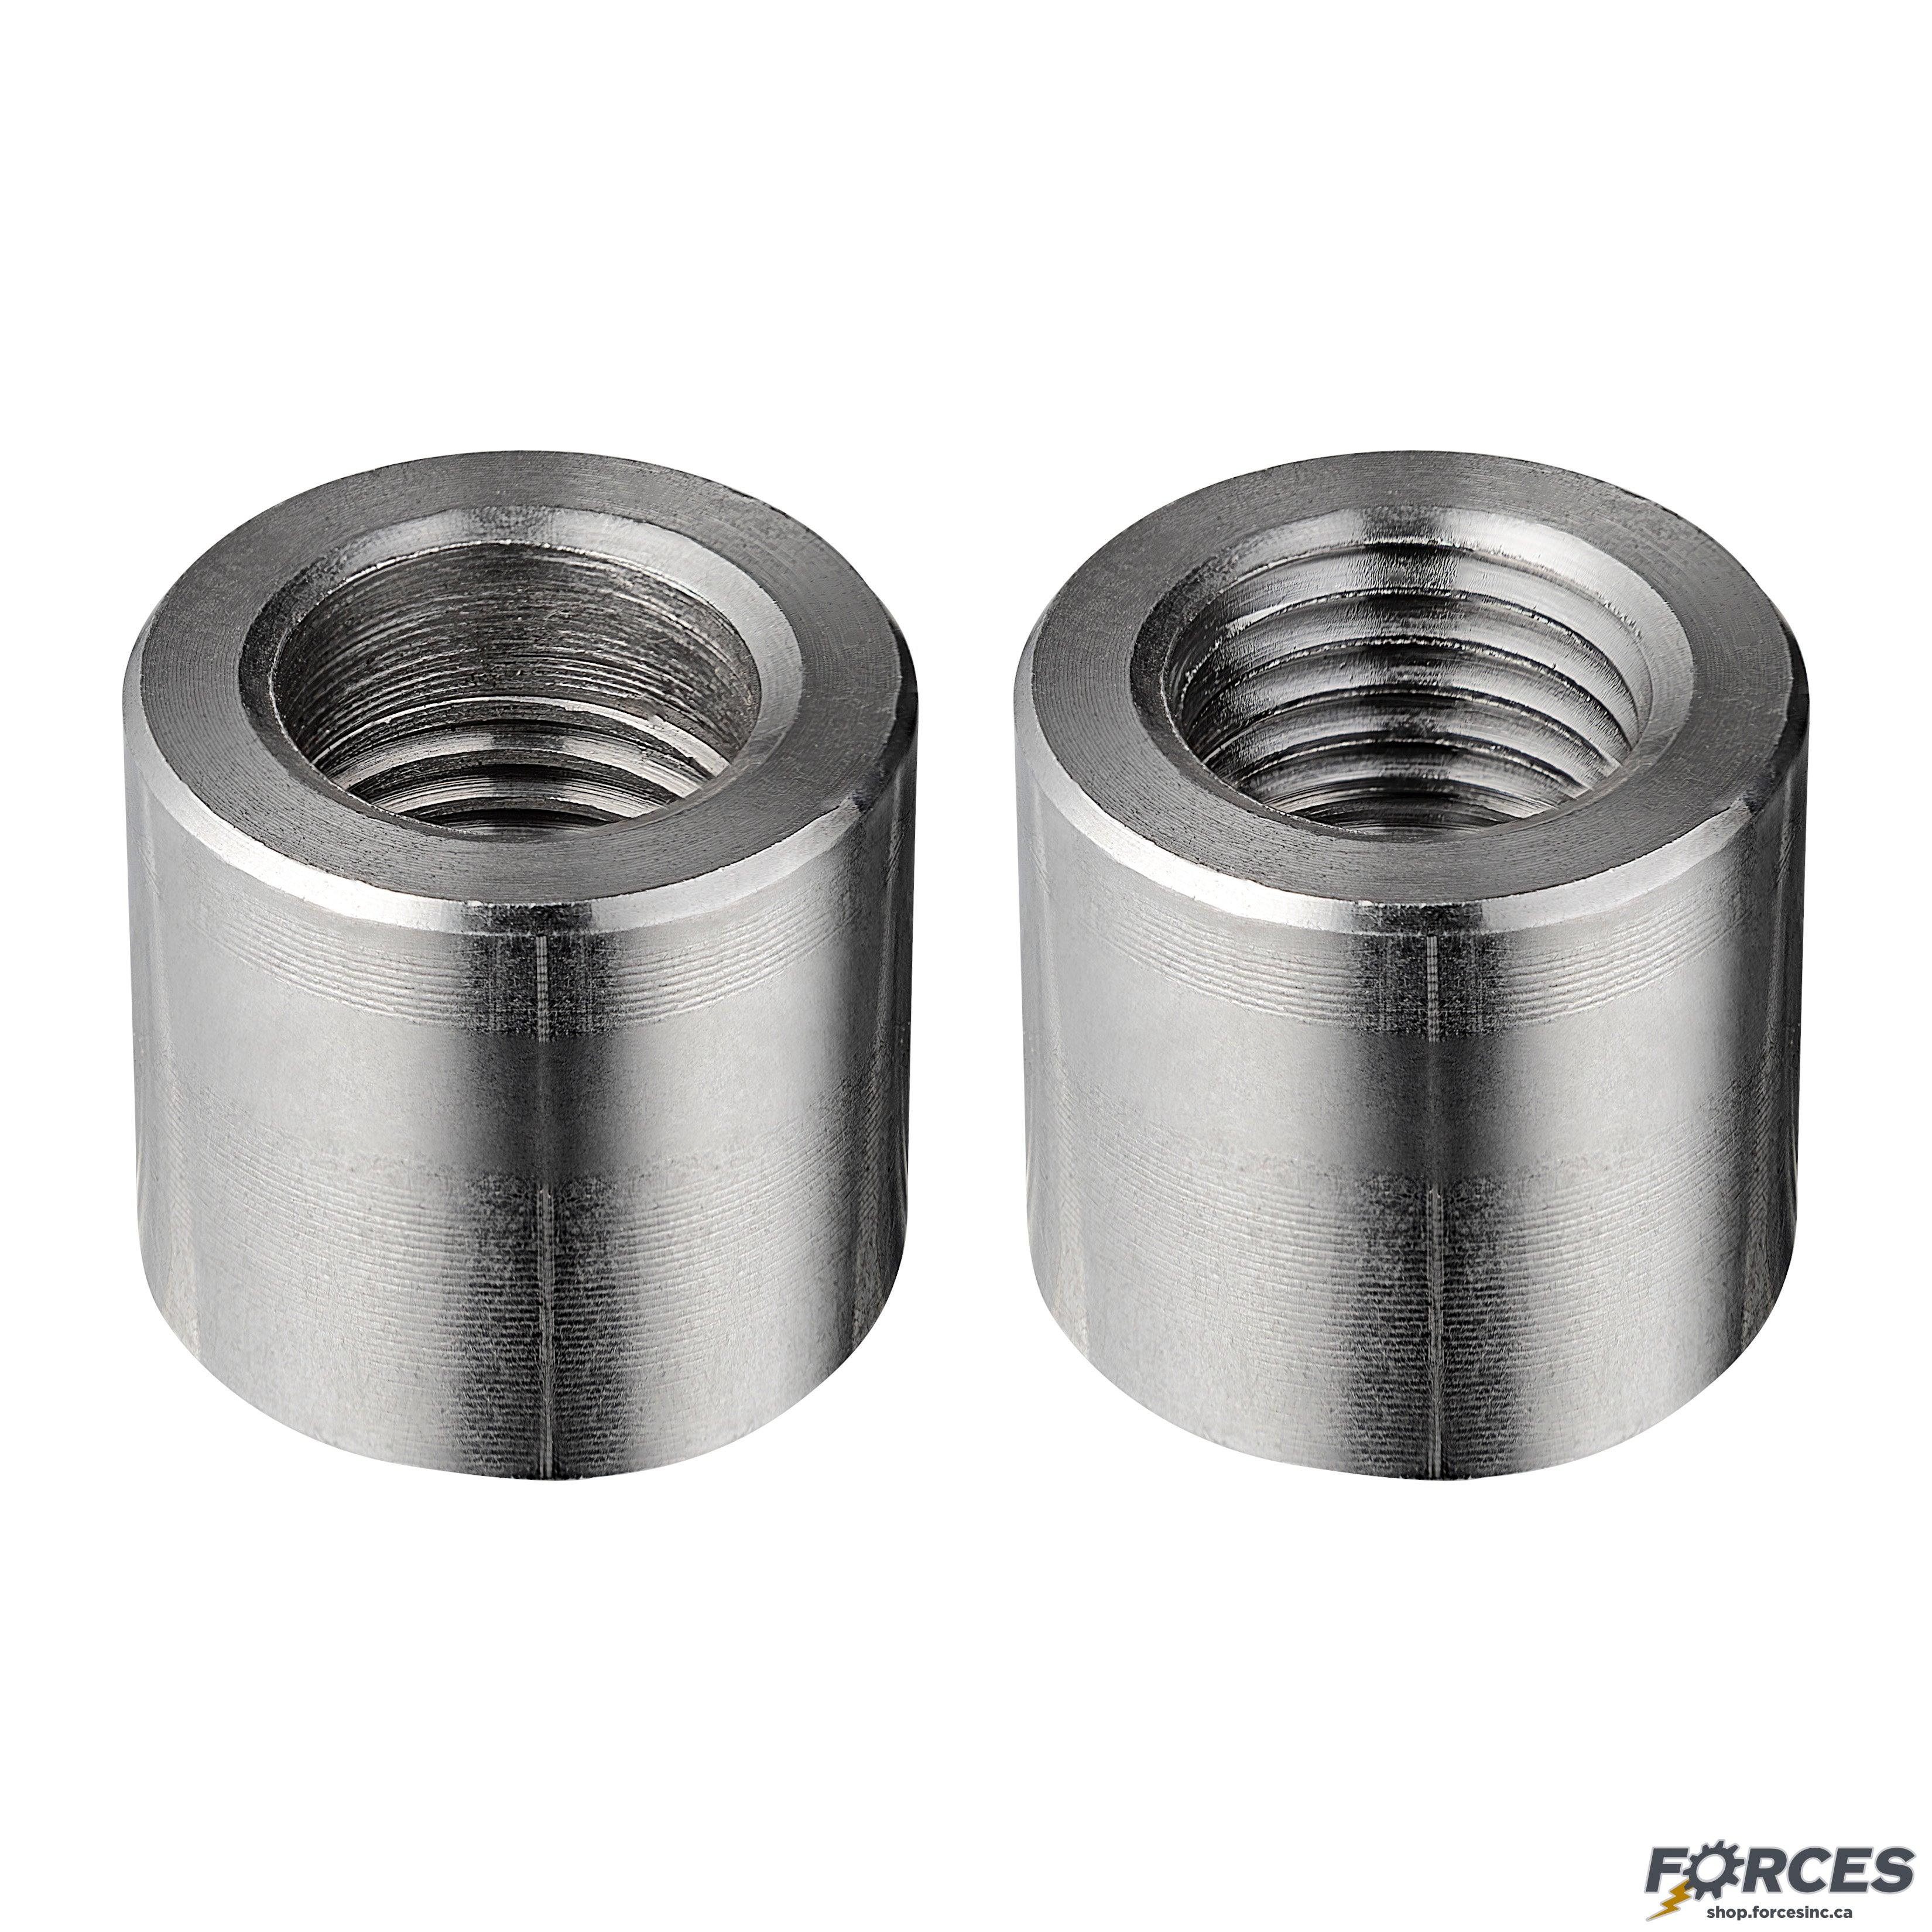 3/4" Half-Coupling NPT #3000 - Stainless Steel 316 - Forces Inc